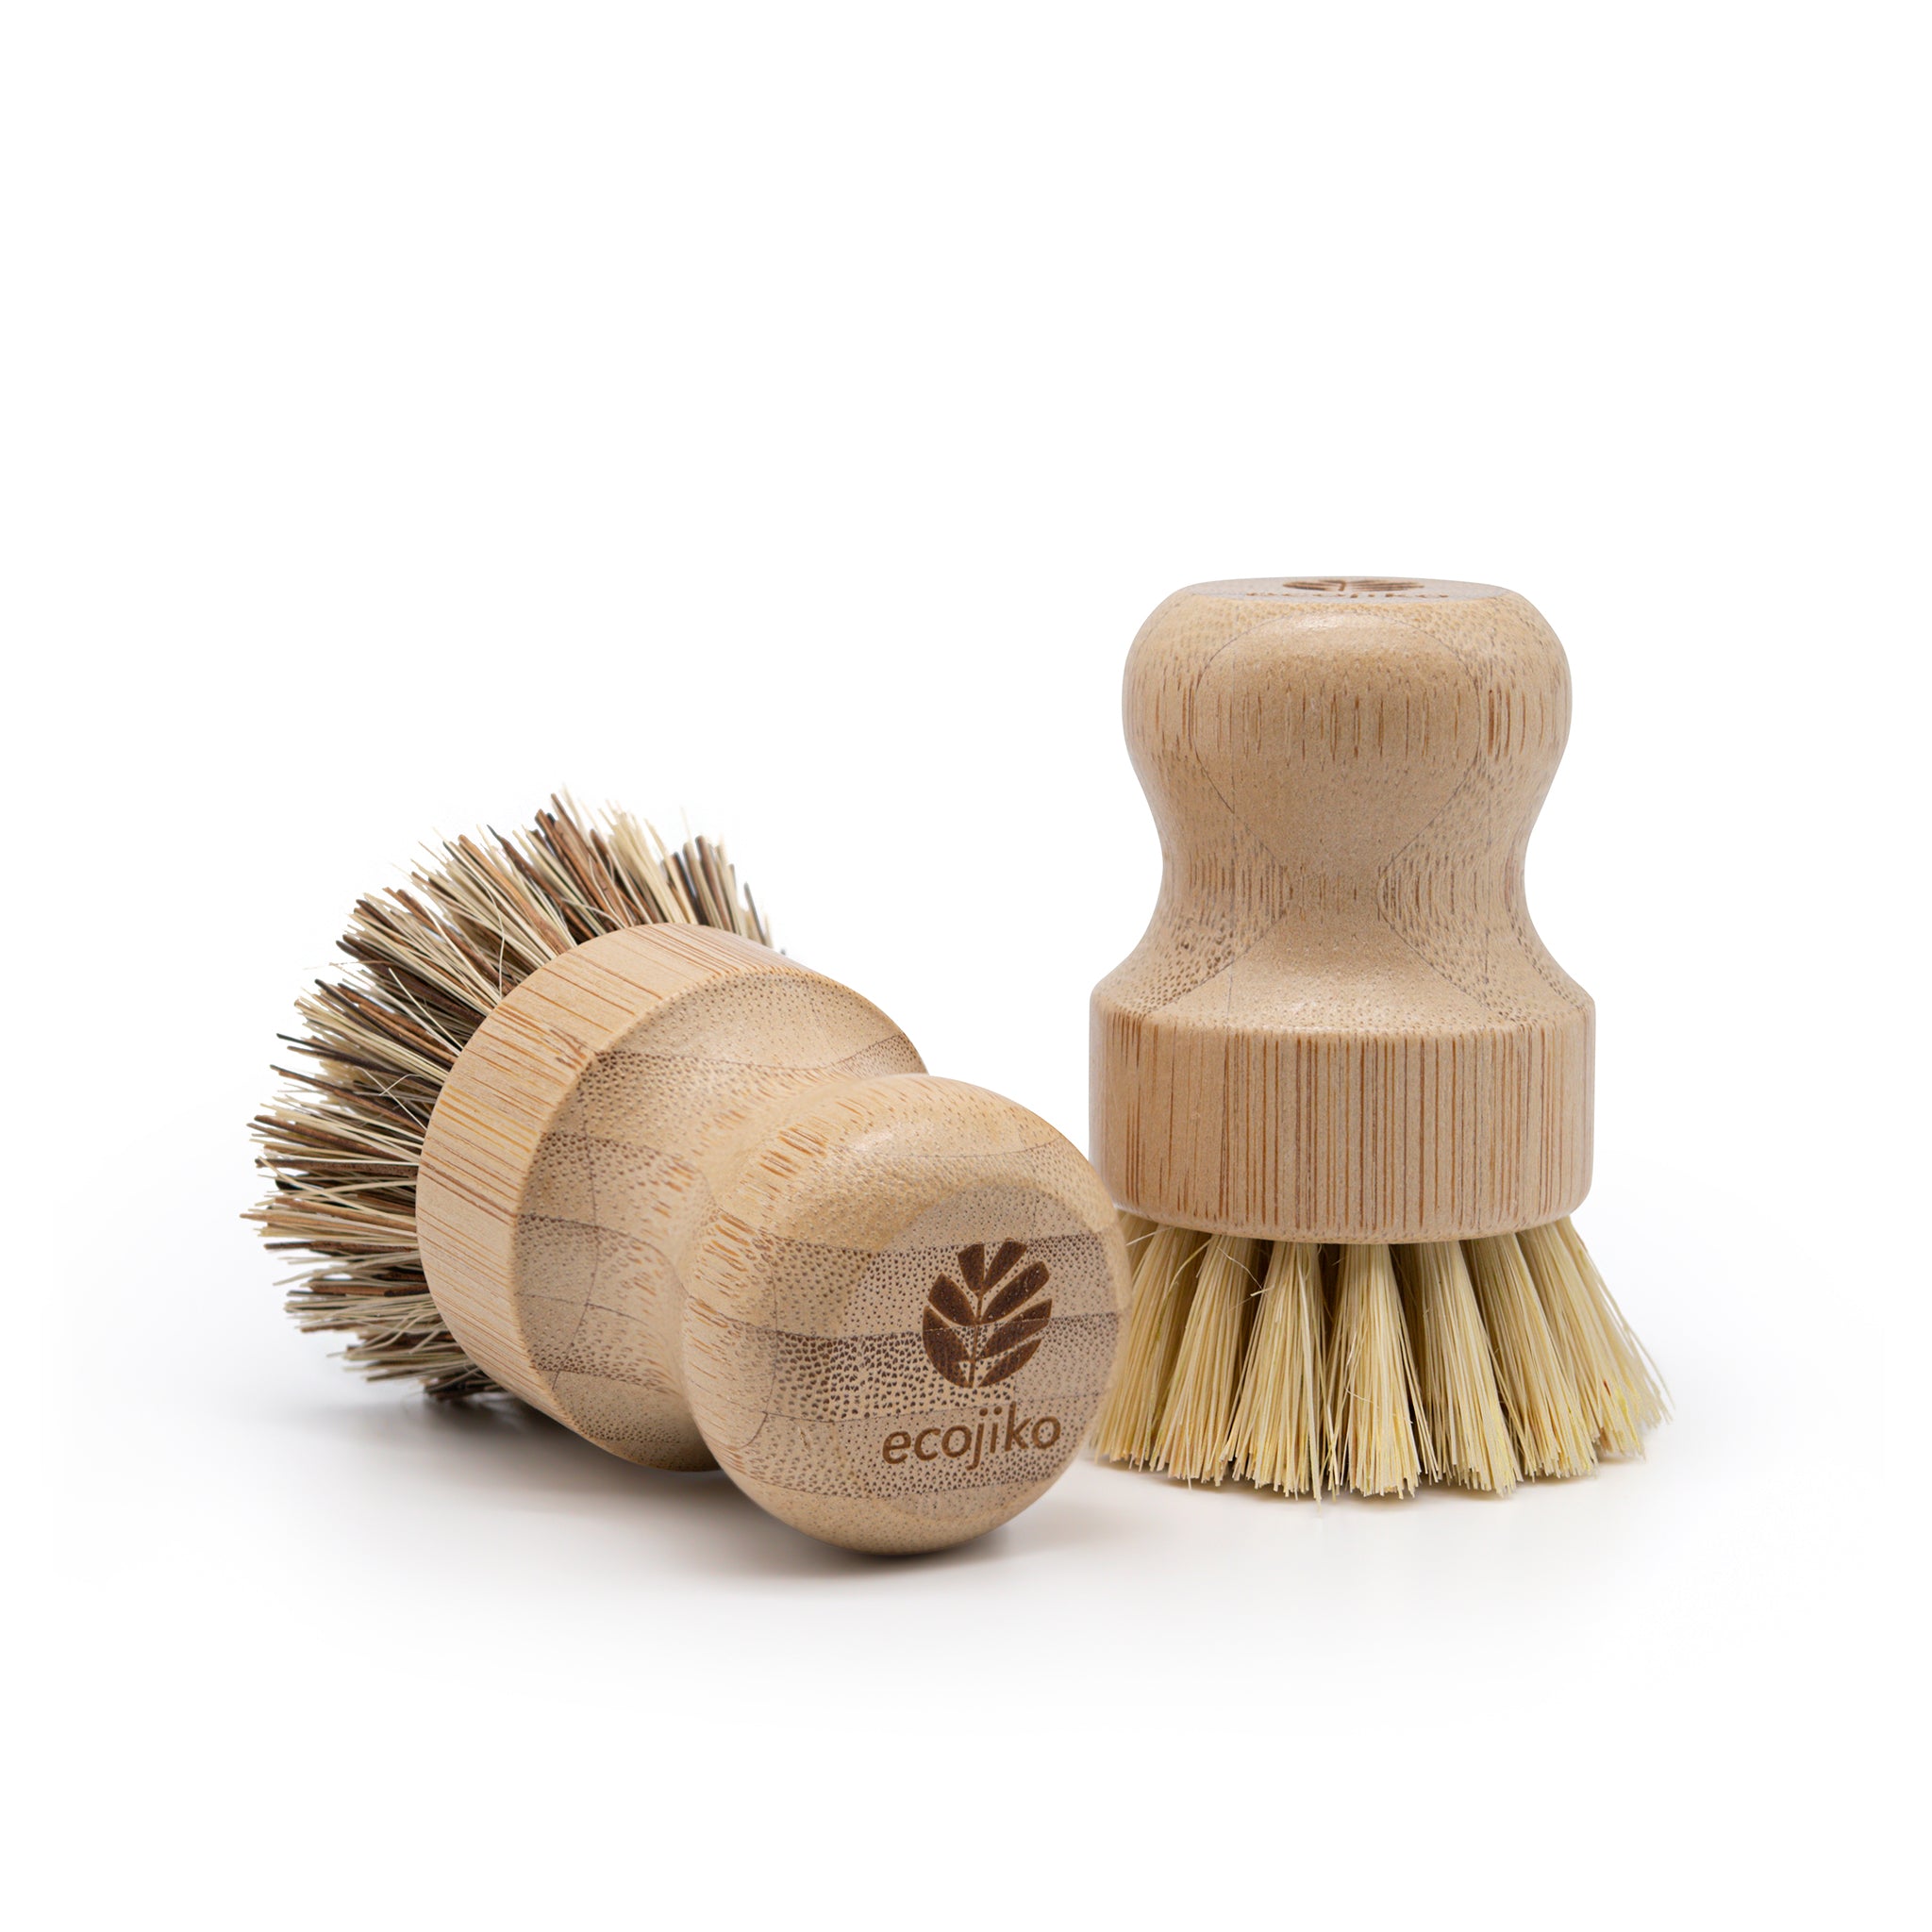 Natural bamboo scrubbing brushes with hard and soft sisal bristles